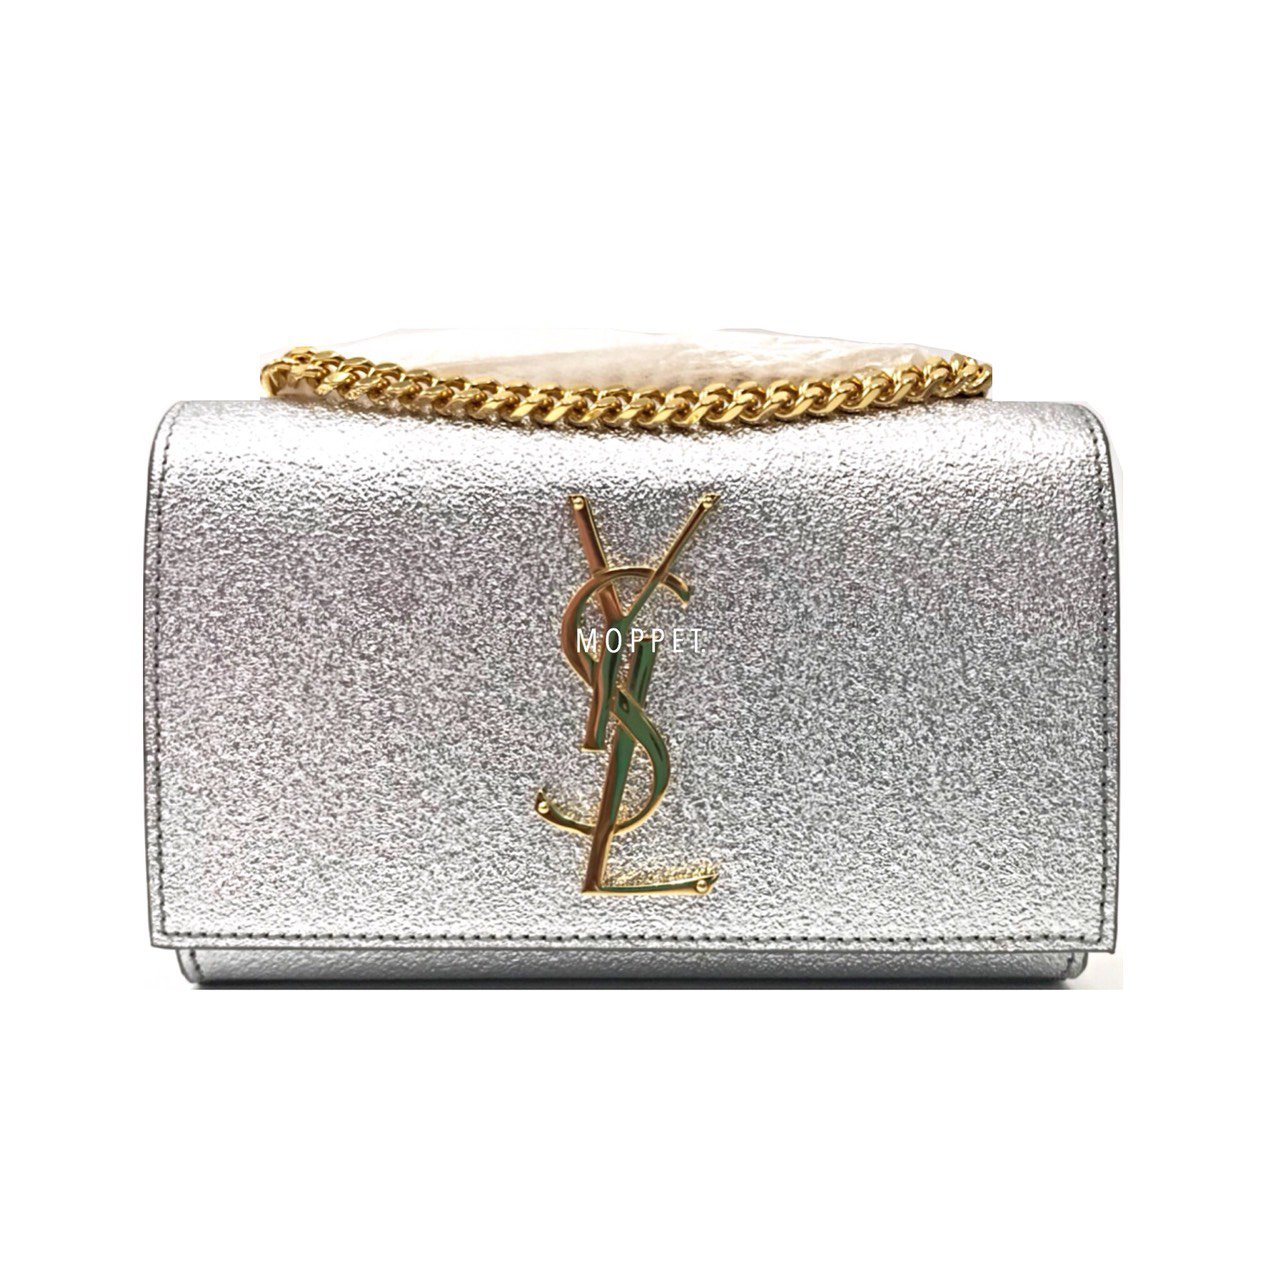 New YSL Kate Mini Bag in Silver Leather GHW